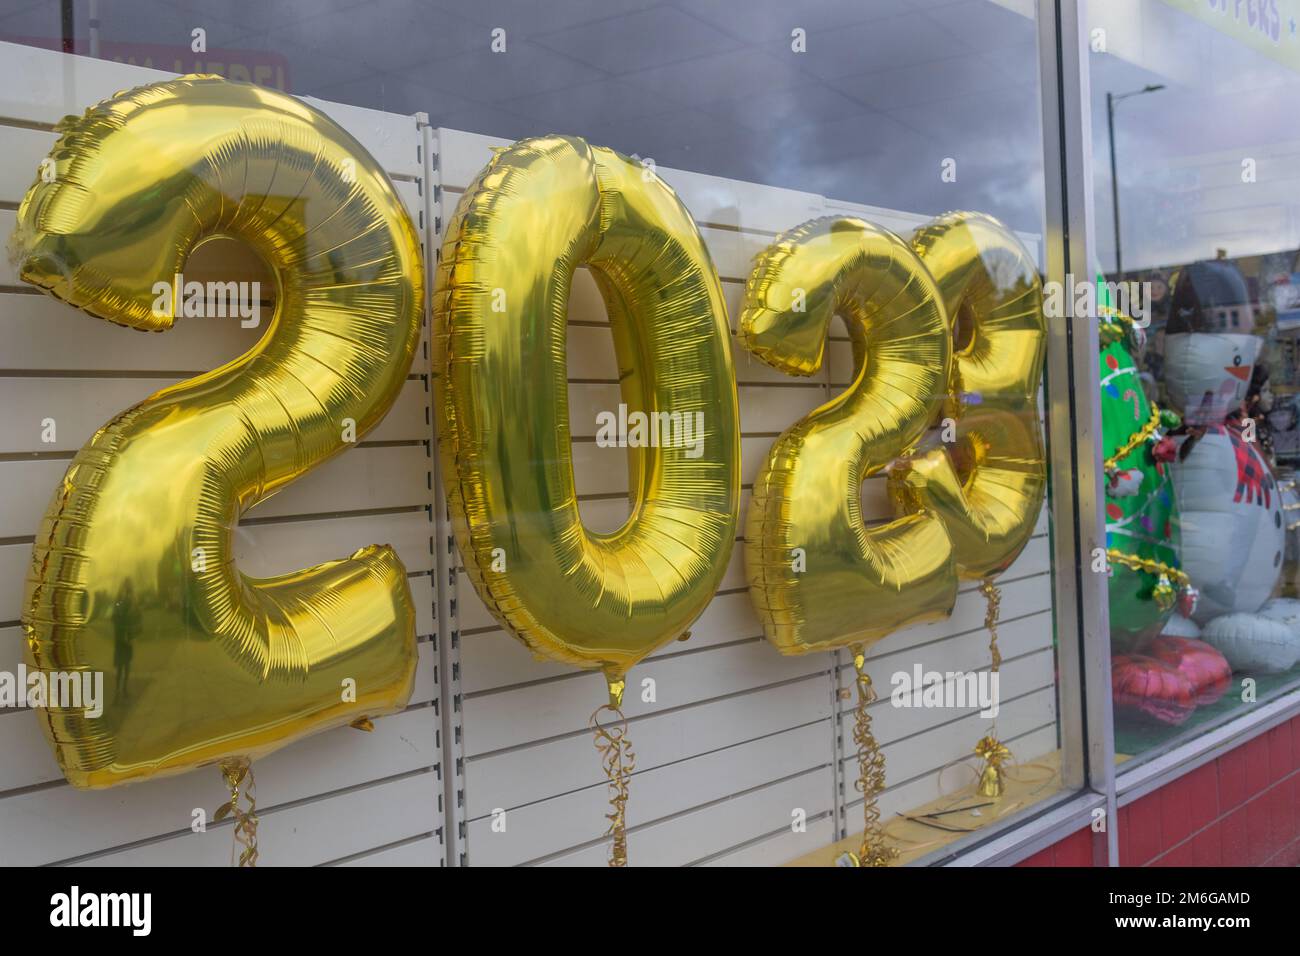 Southend on Sea, UK. 4th Jan, 2023. A shop window display of balloons celebrating the new year. Penelope Barritt/Alamy Live News Stock Photo